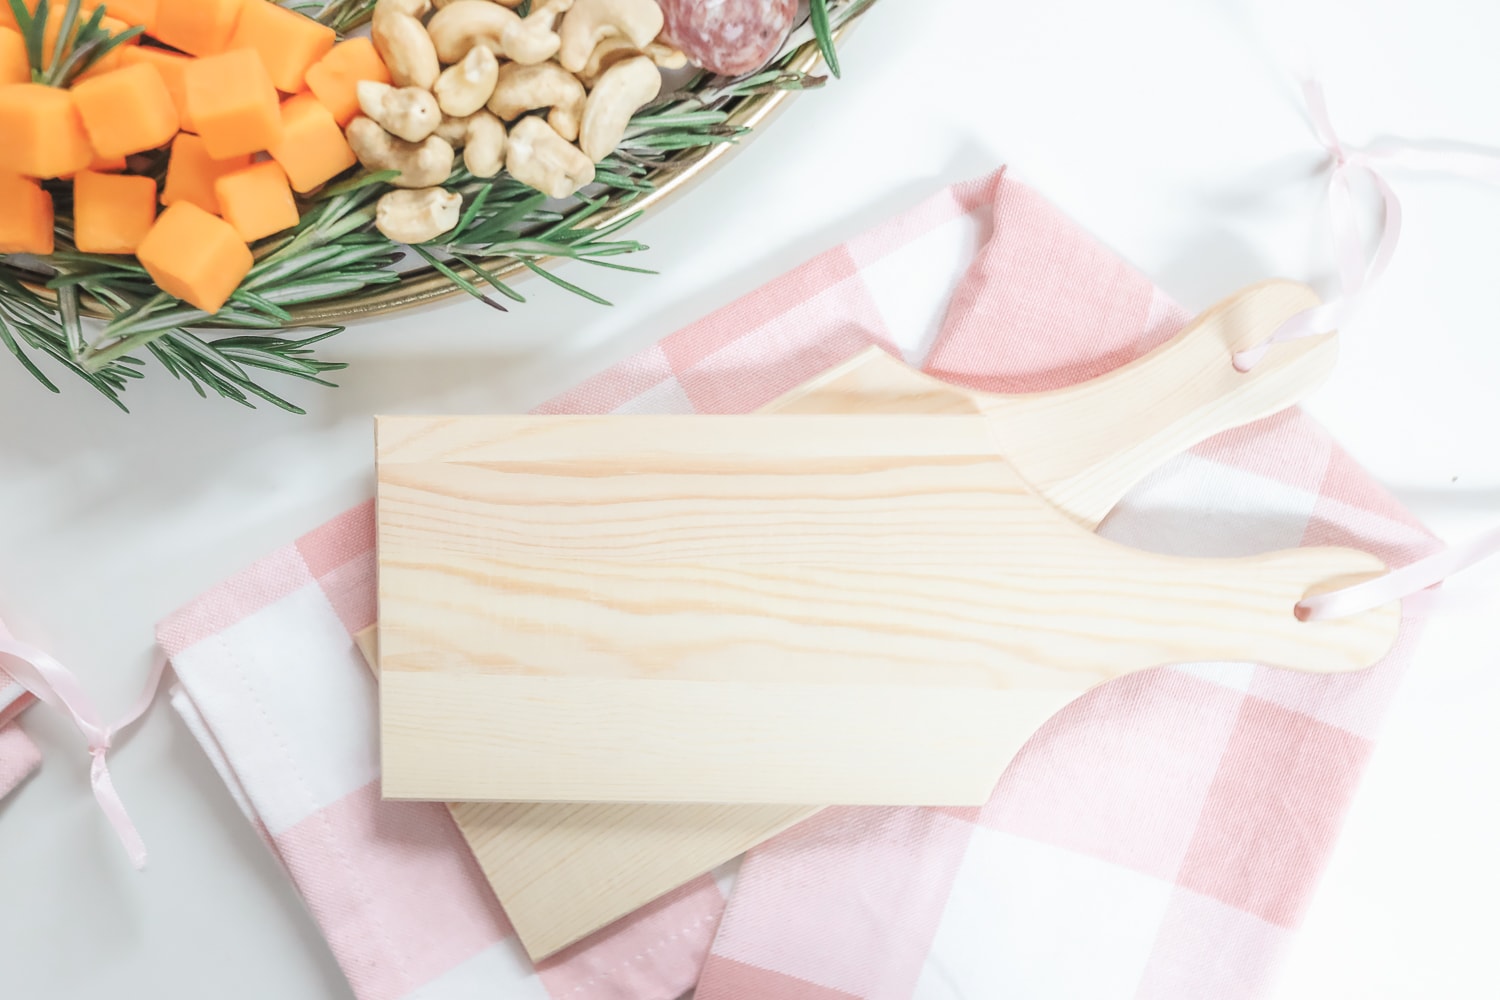 Personalized mini cheese boards finished with food-safe oil by blogger Stephanie Ziajka on Diary of a Debutante